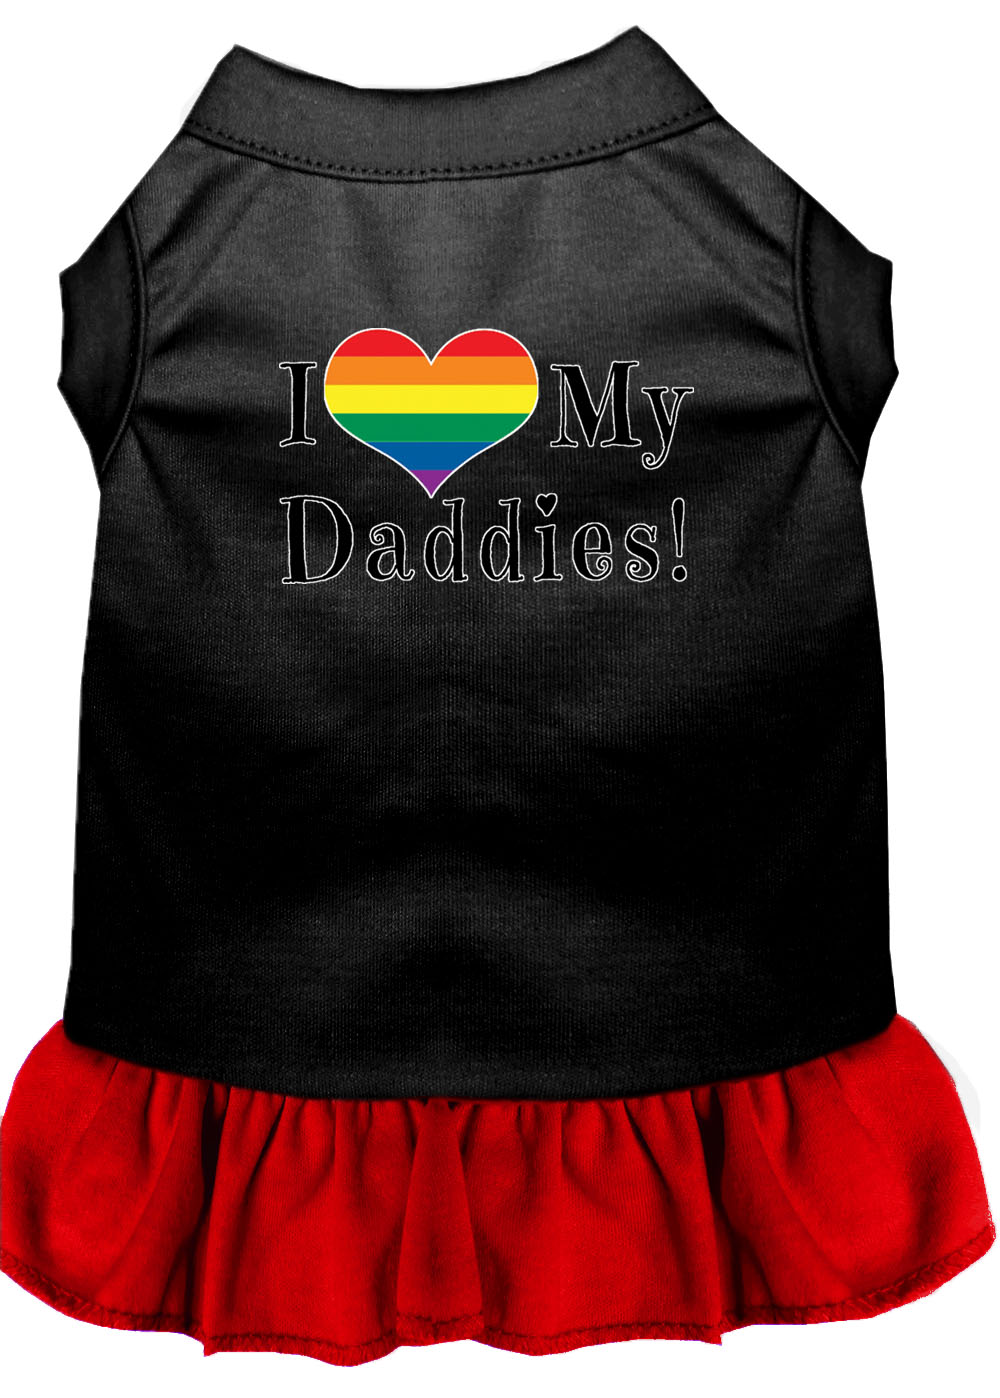 I Heart my Daddies Screen Print Dog Dress Black with Red Med